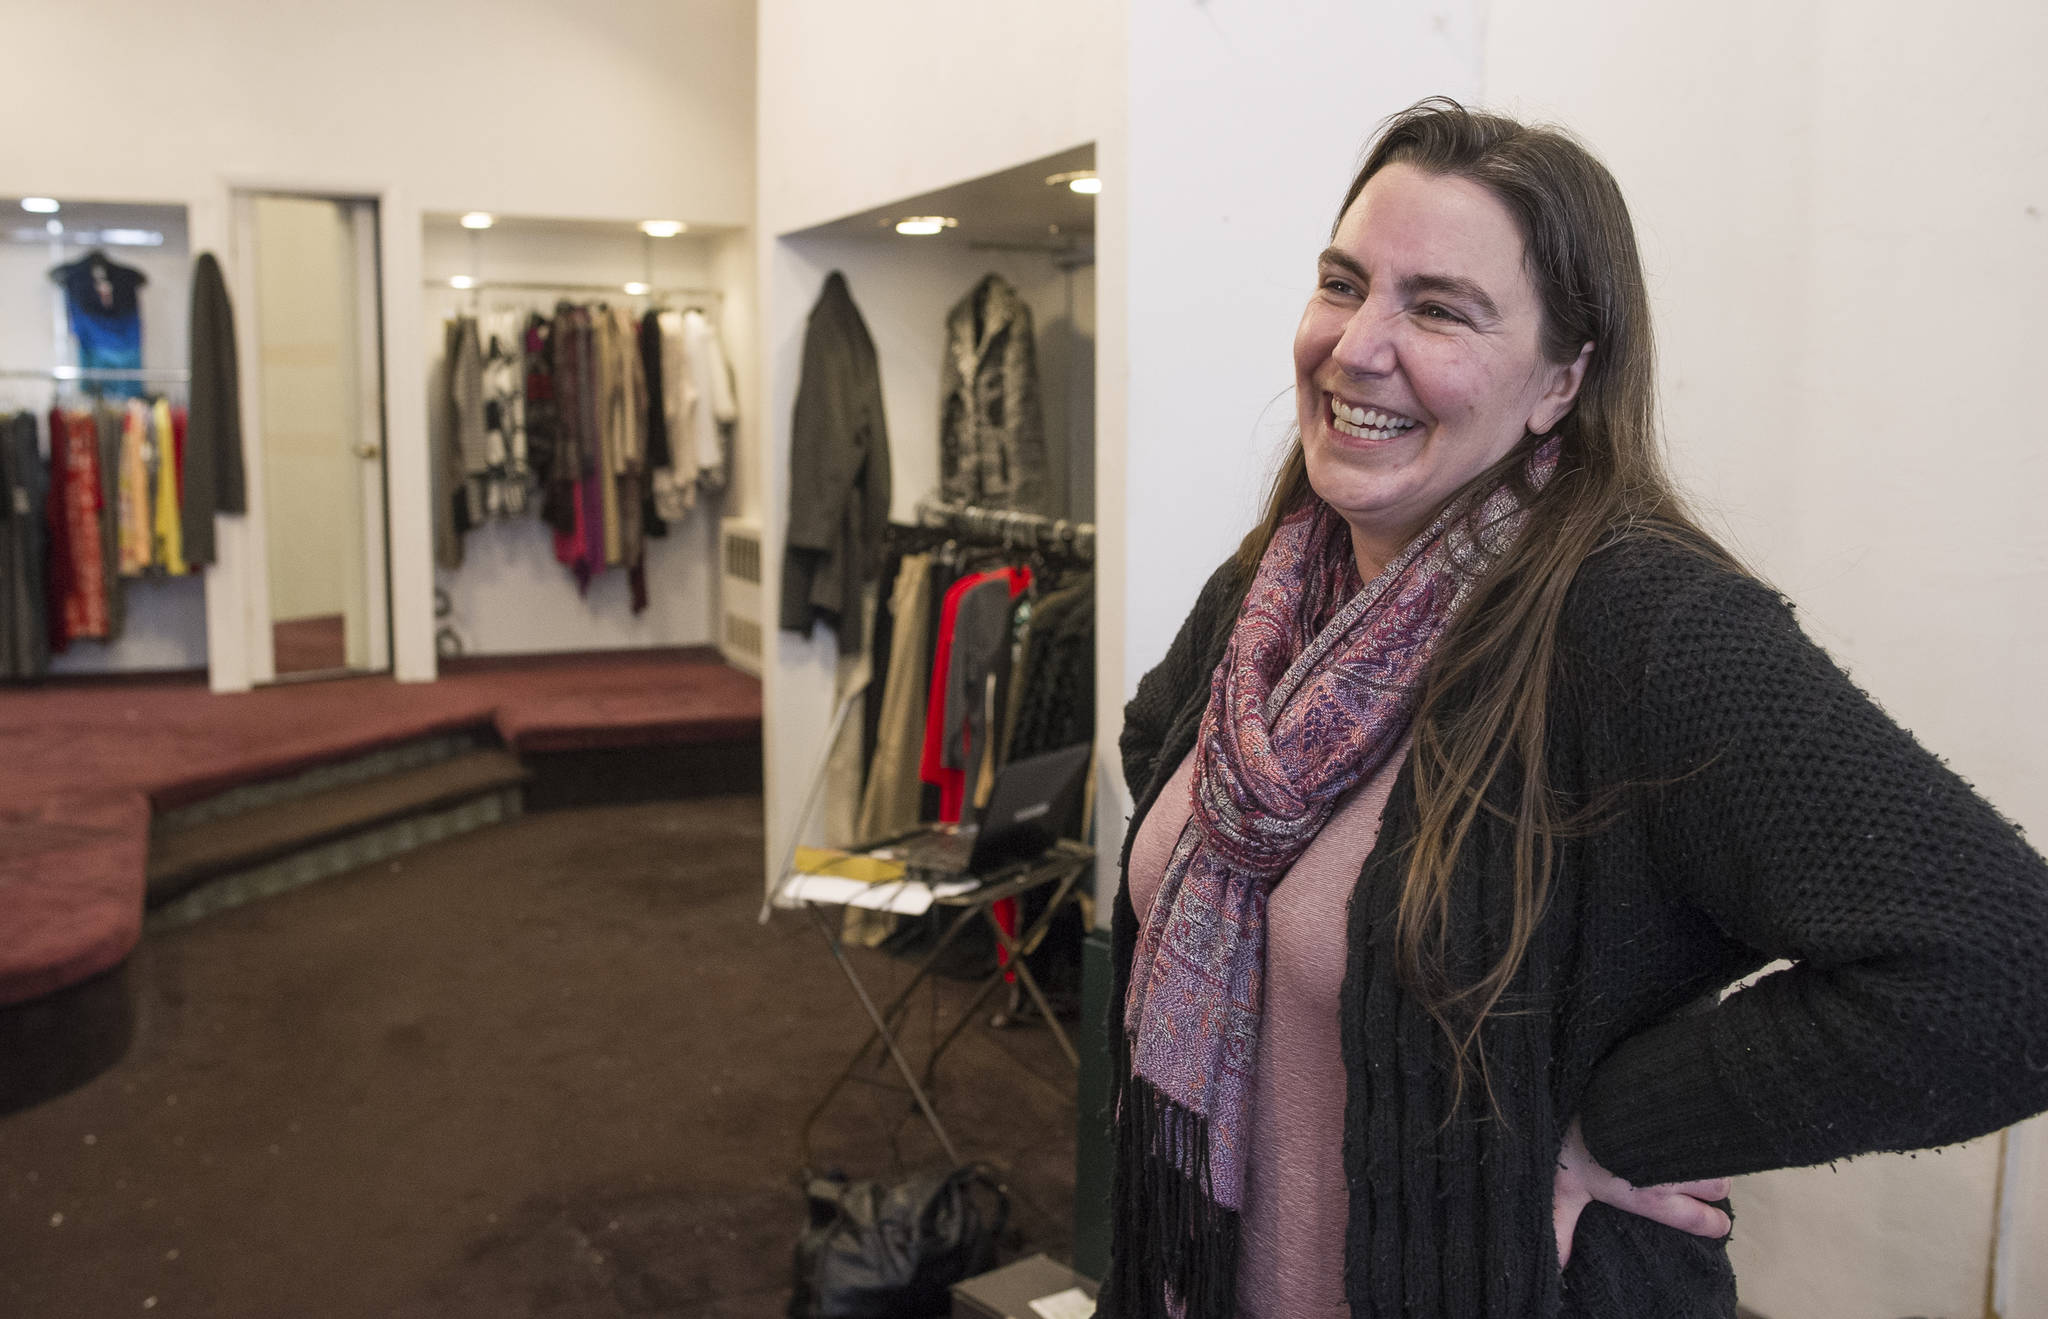 Lisa Ryals, owner of Lisa Davidson’s Boutique, talks about the closing of her business after 22 years on Wednesday, Nov. 1, 2017. (Michael Penn | Juneau Empire)